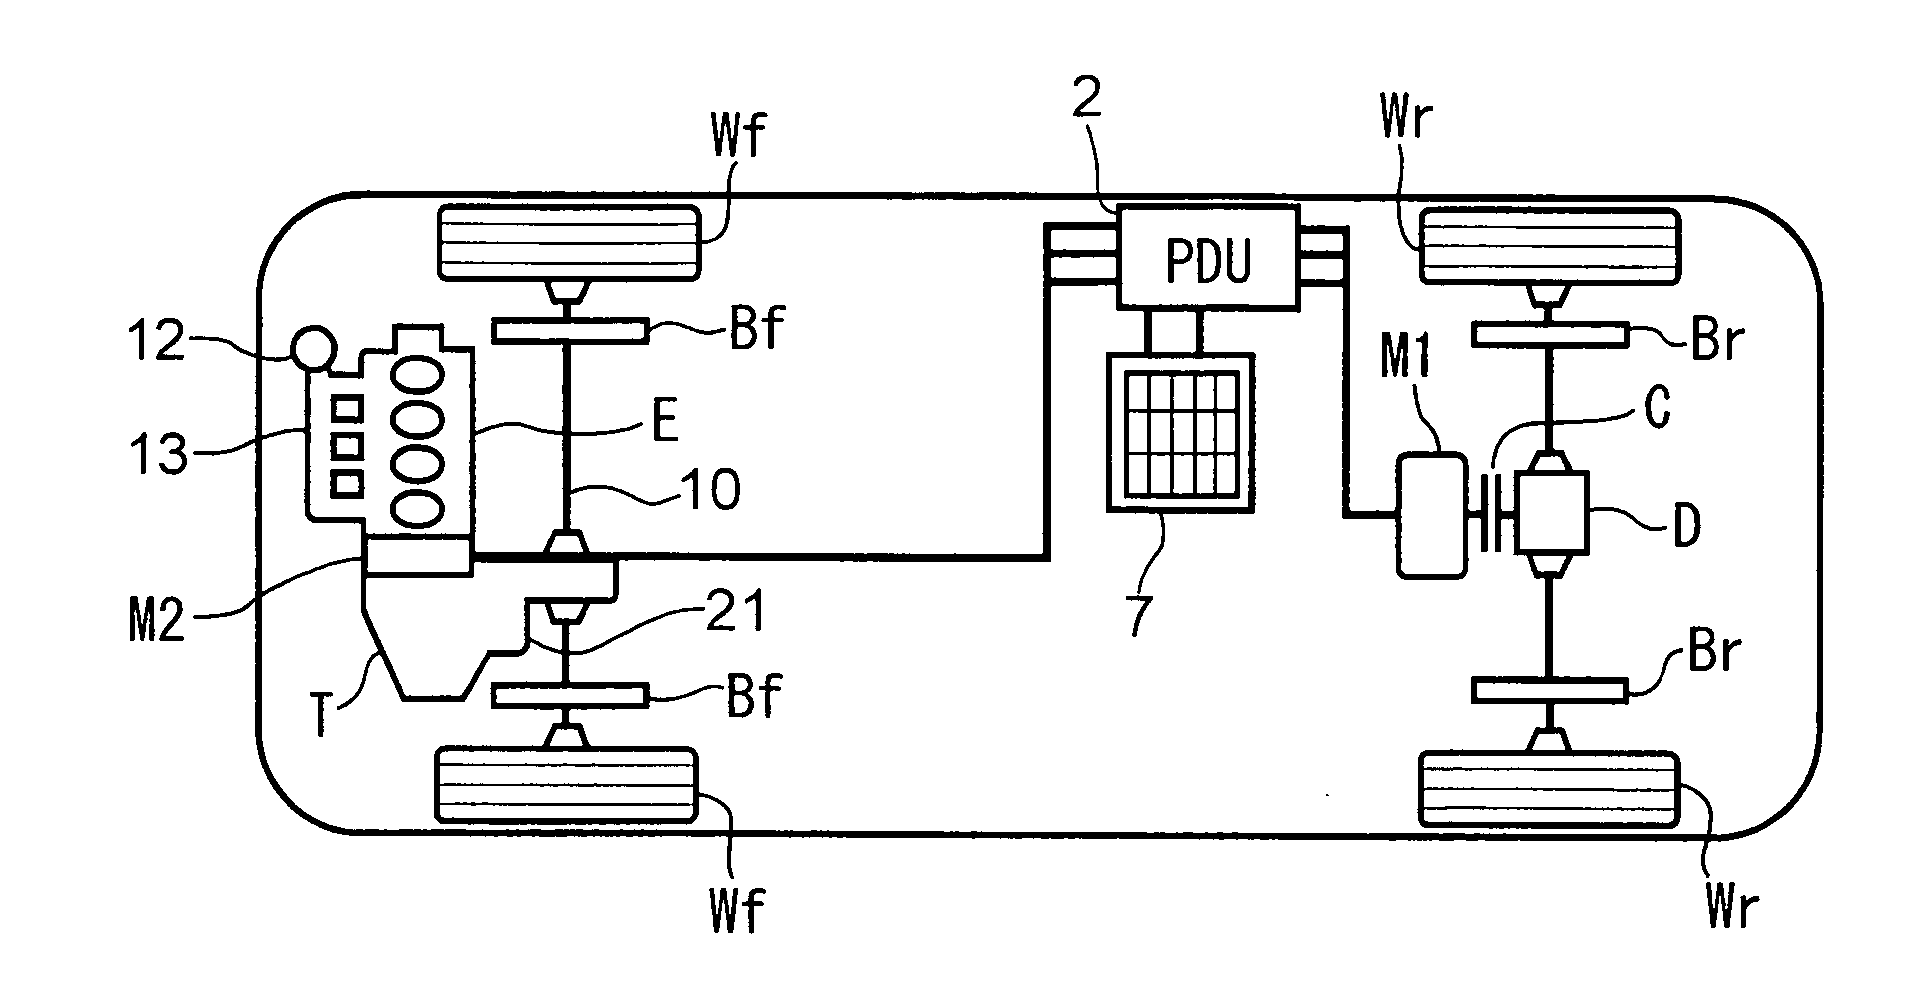 Automatic transmission controller for hybrid vehicle